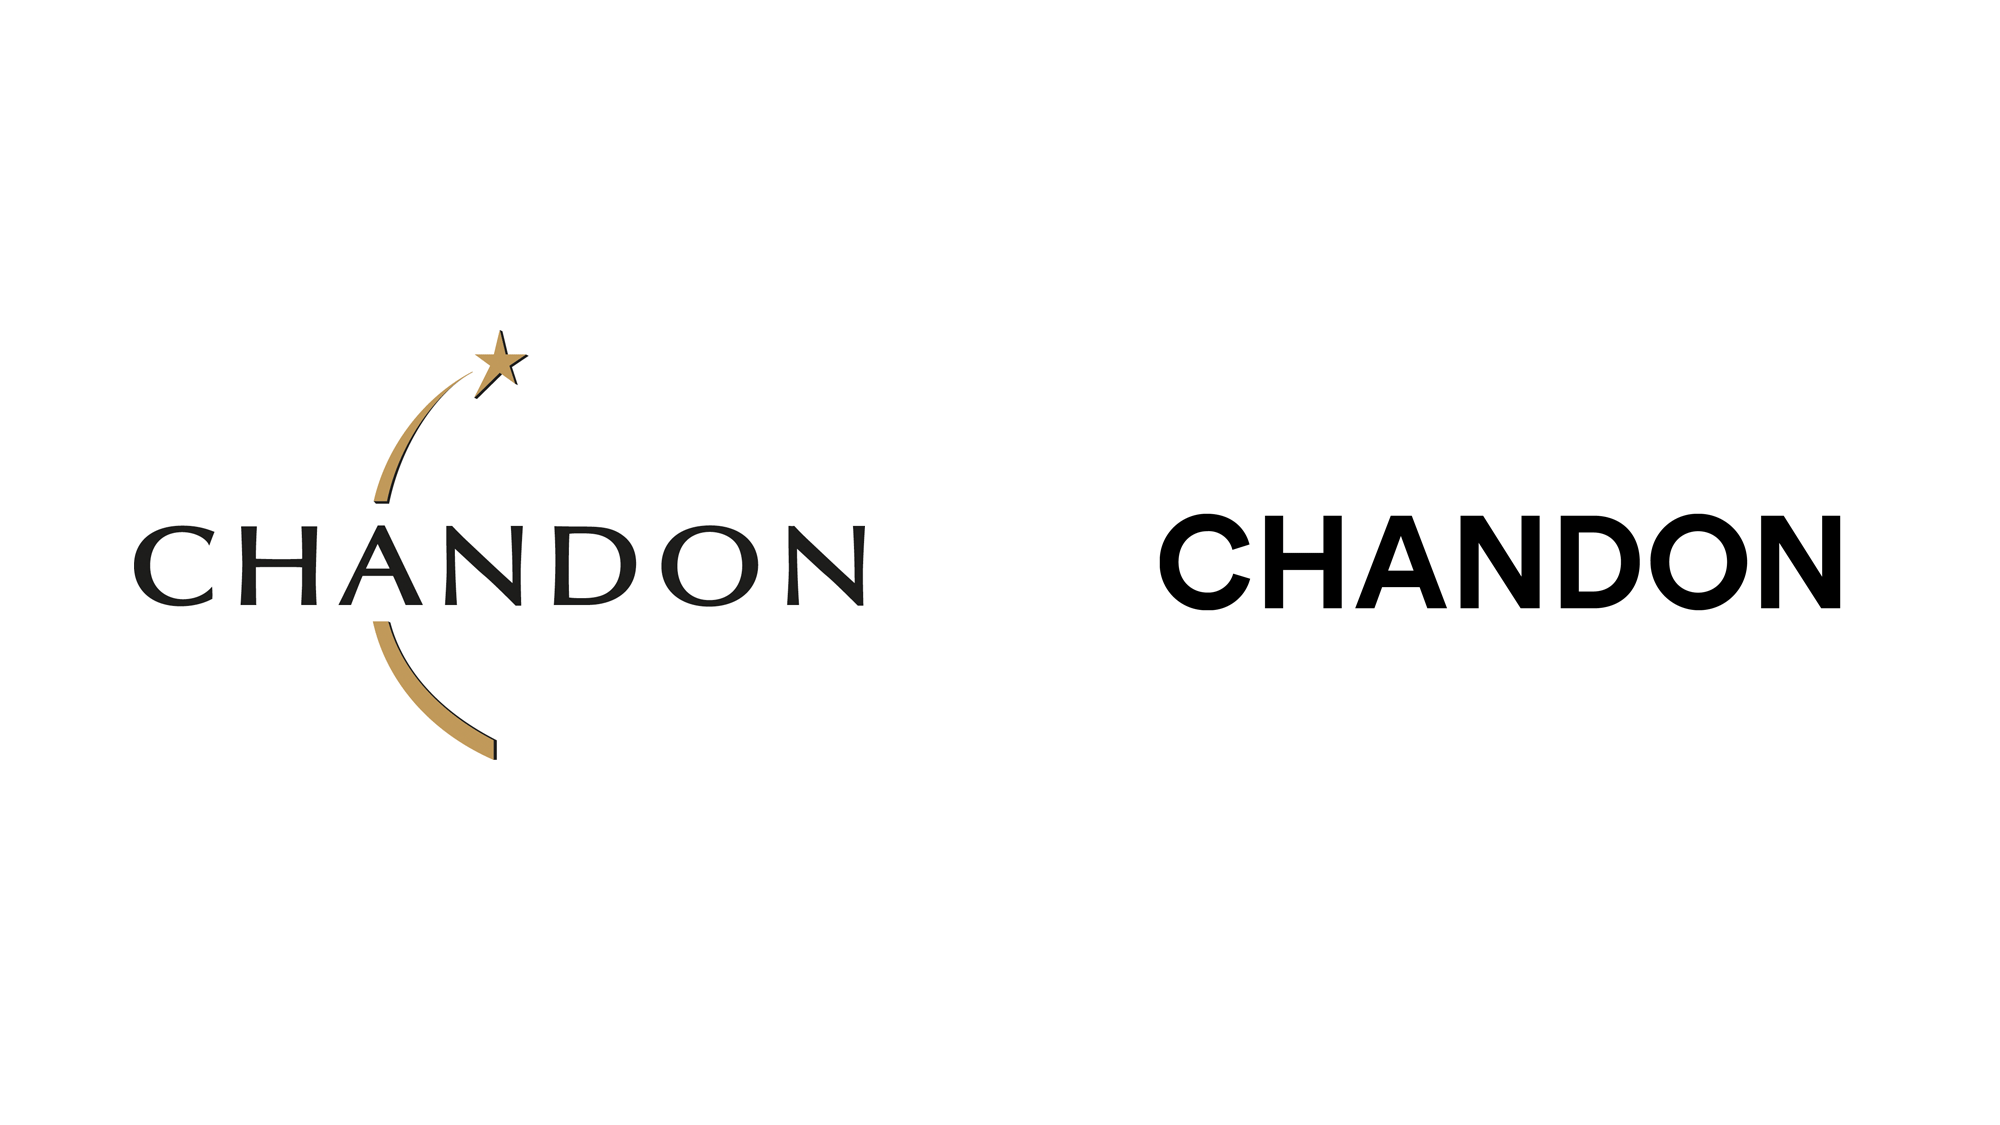 Brand New: New Logo, Identity, and Packaging for Chandon by MadeThought